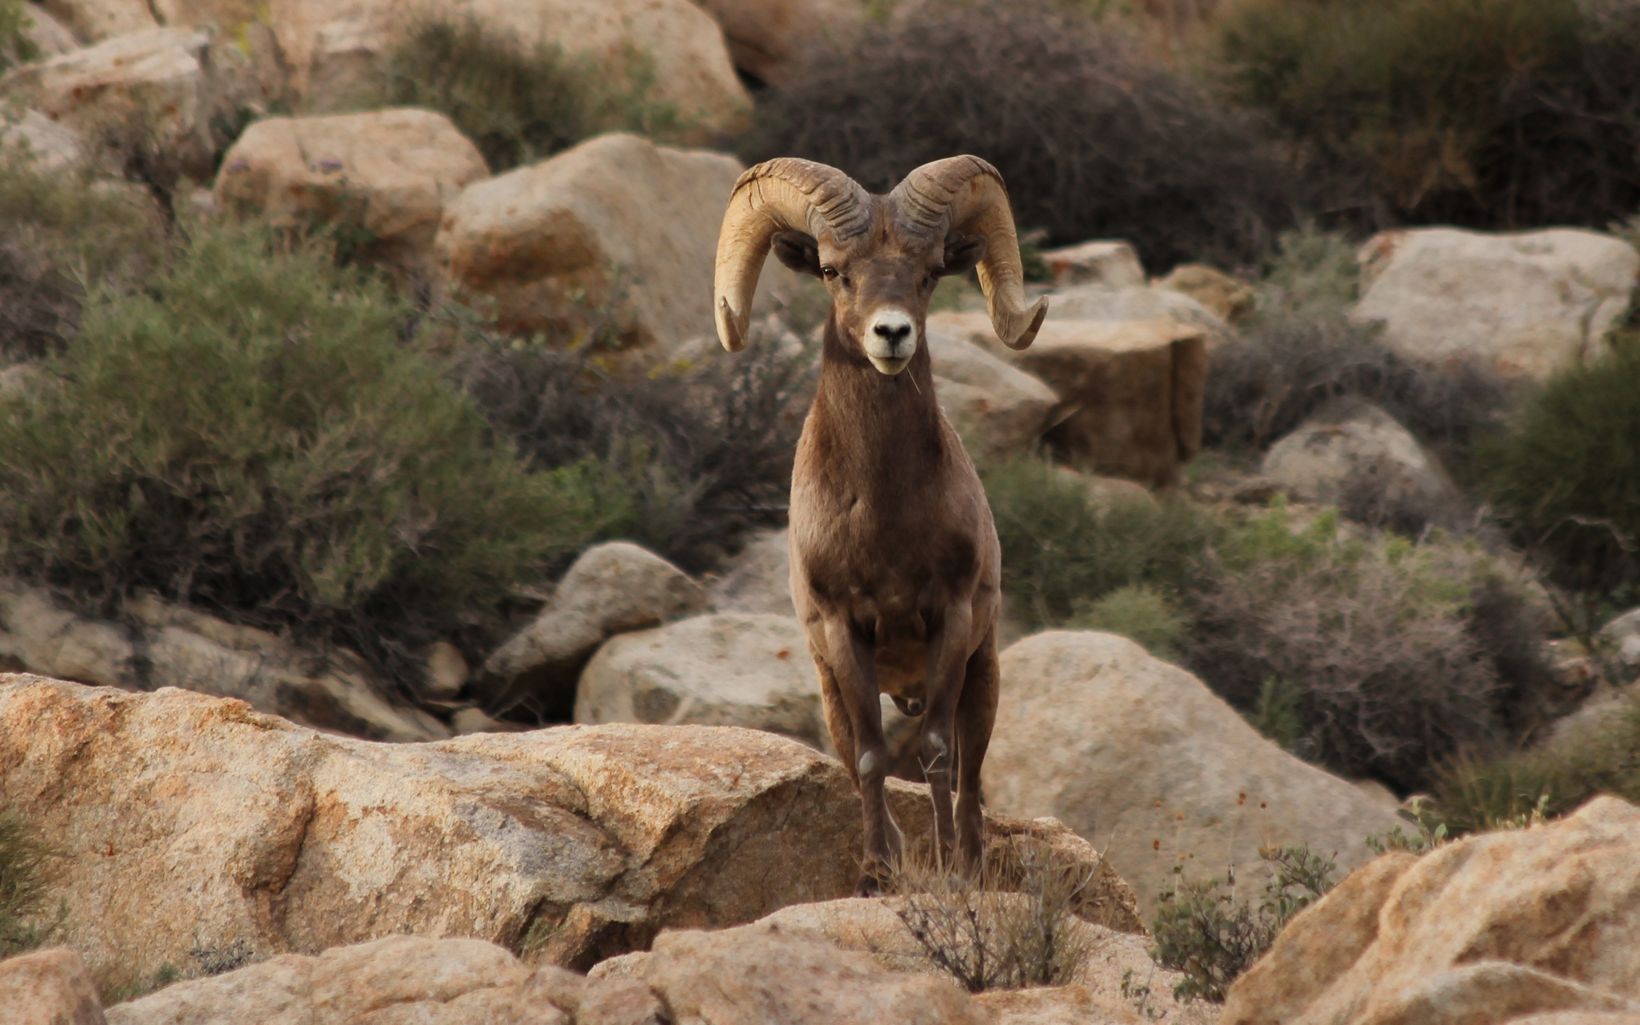 Close up of desert bighorn sheep standing on rocks and looking at the camera.